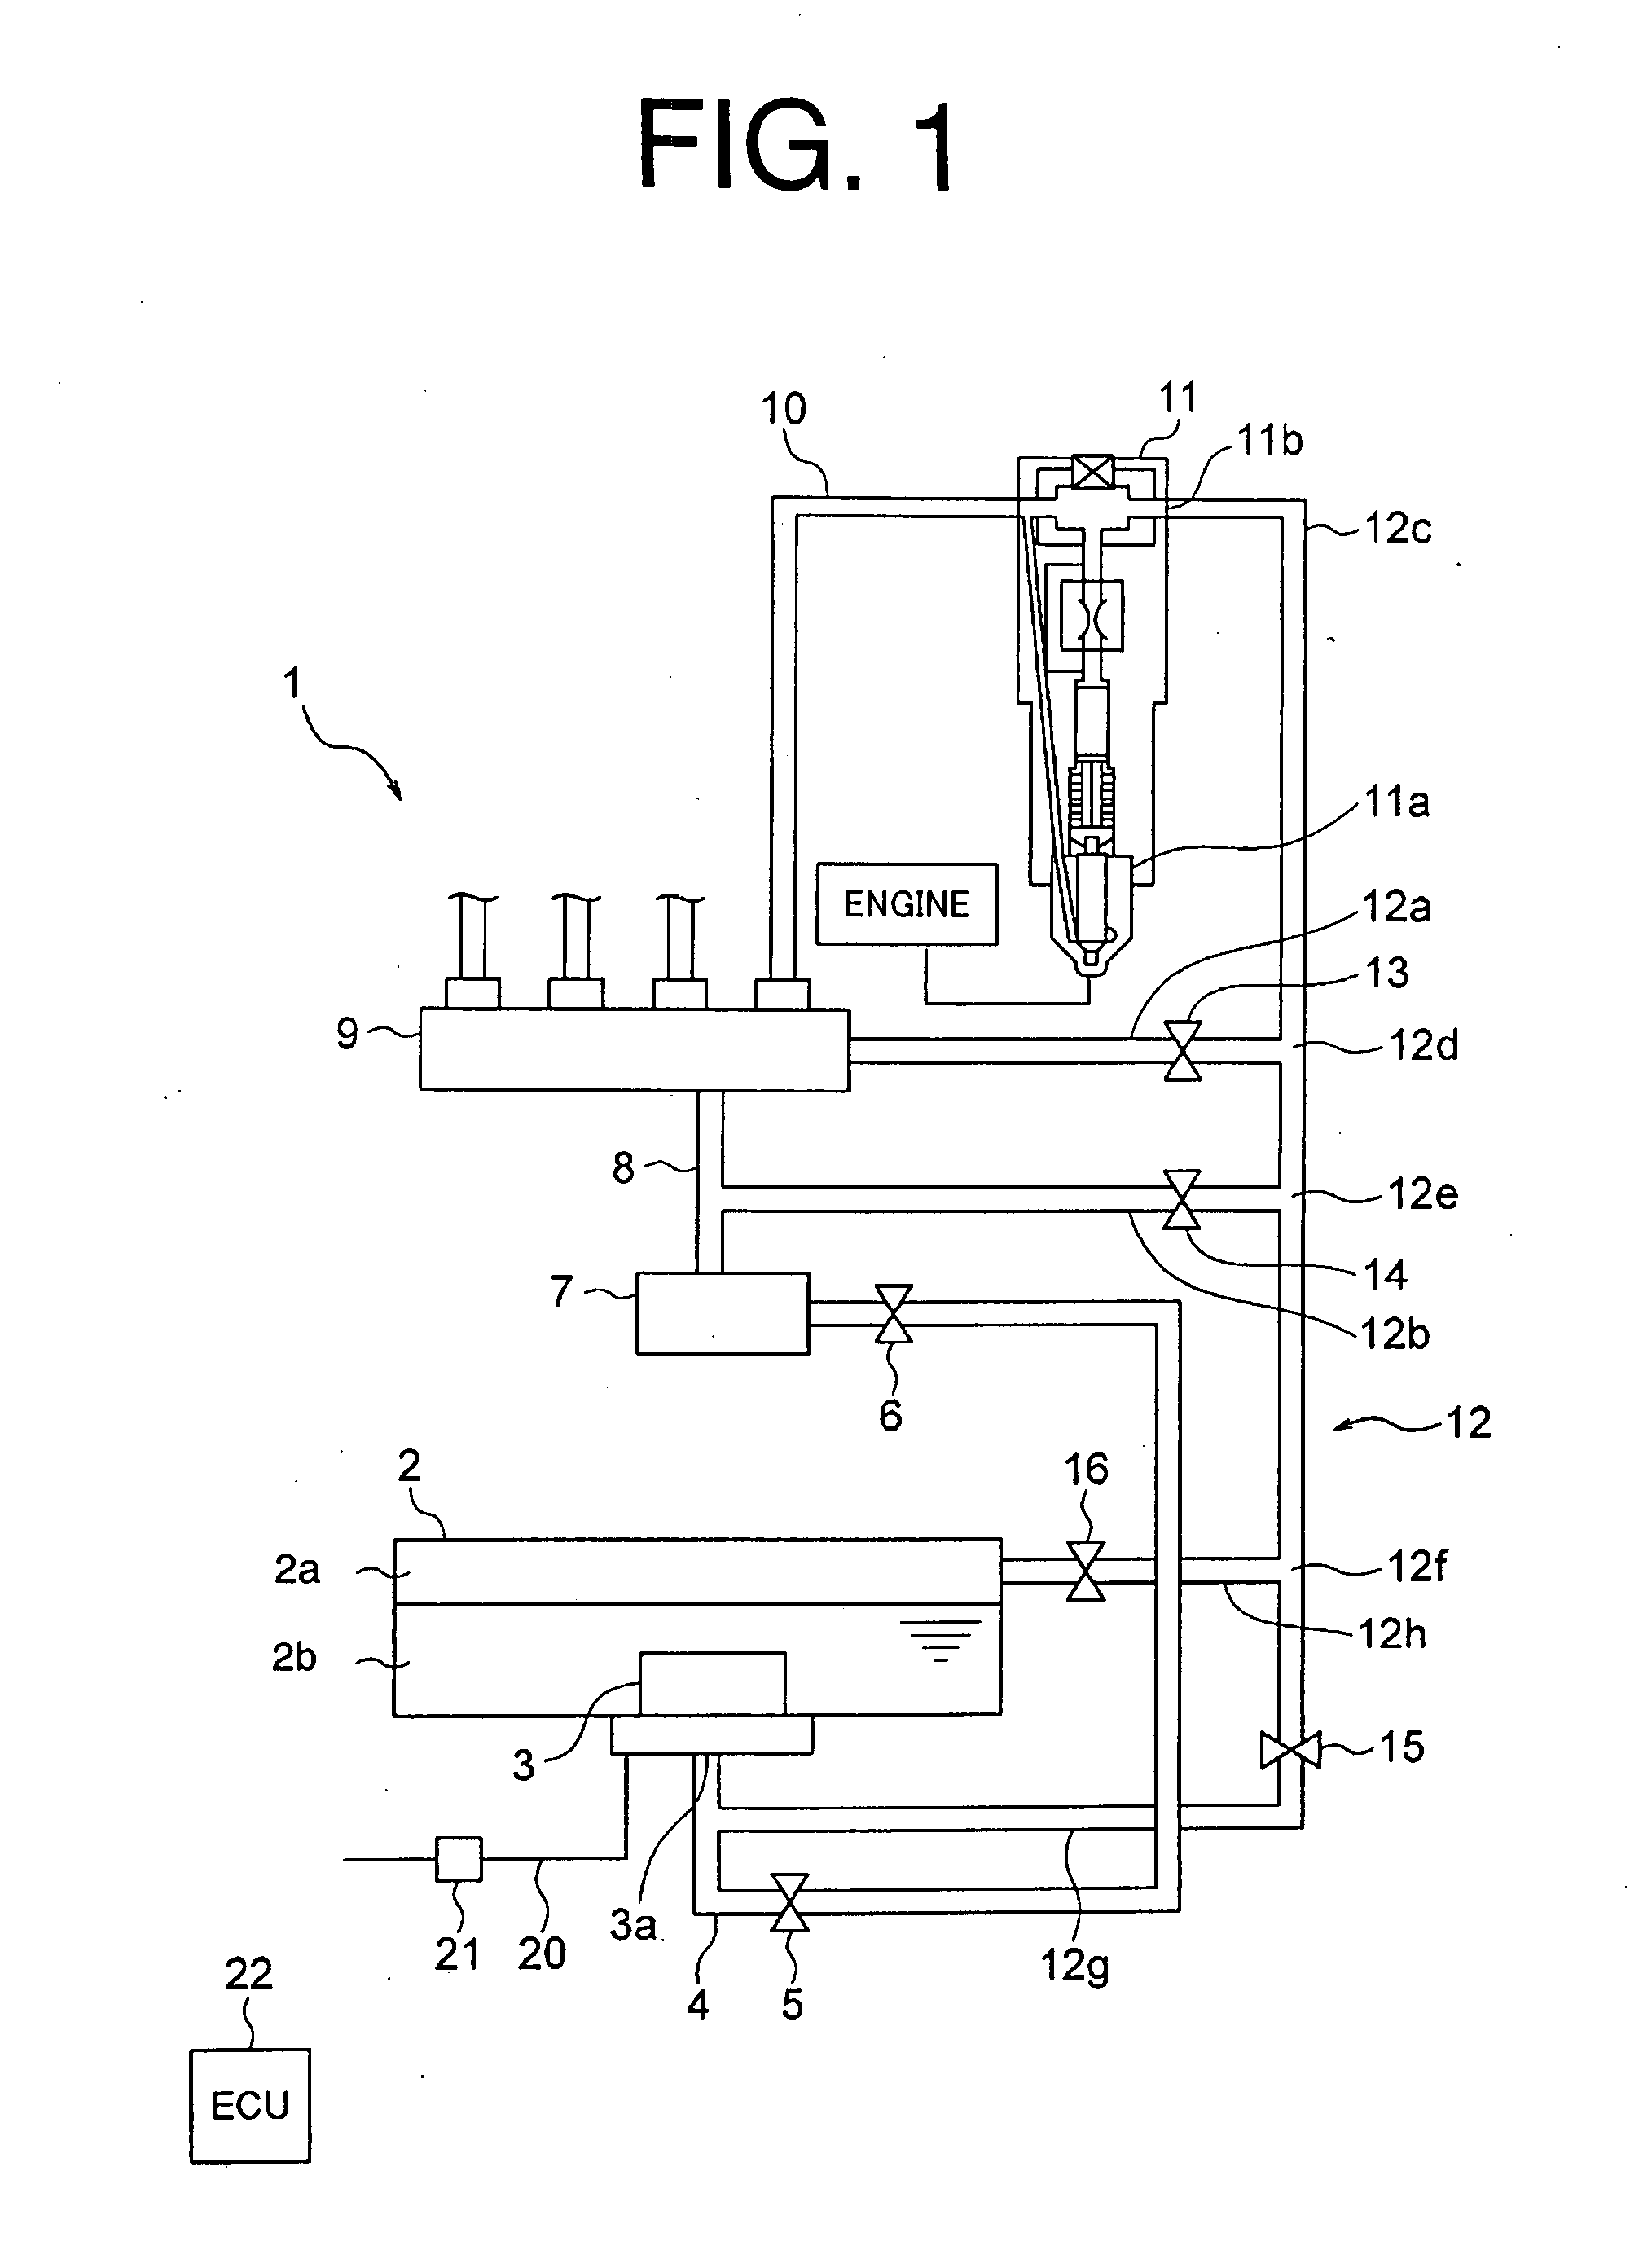 Fuel supply system for DME engine